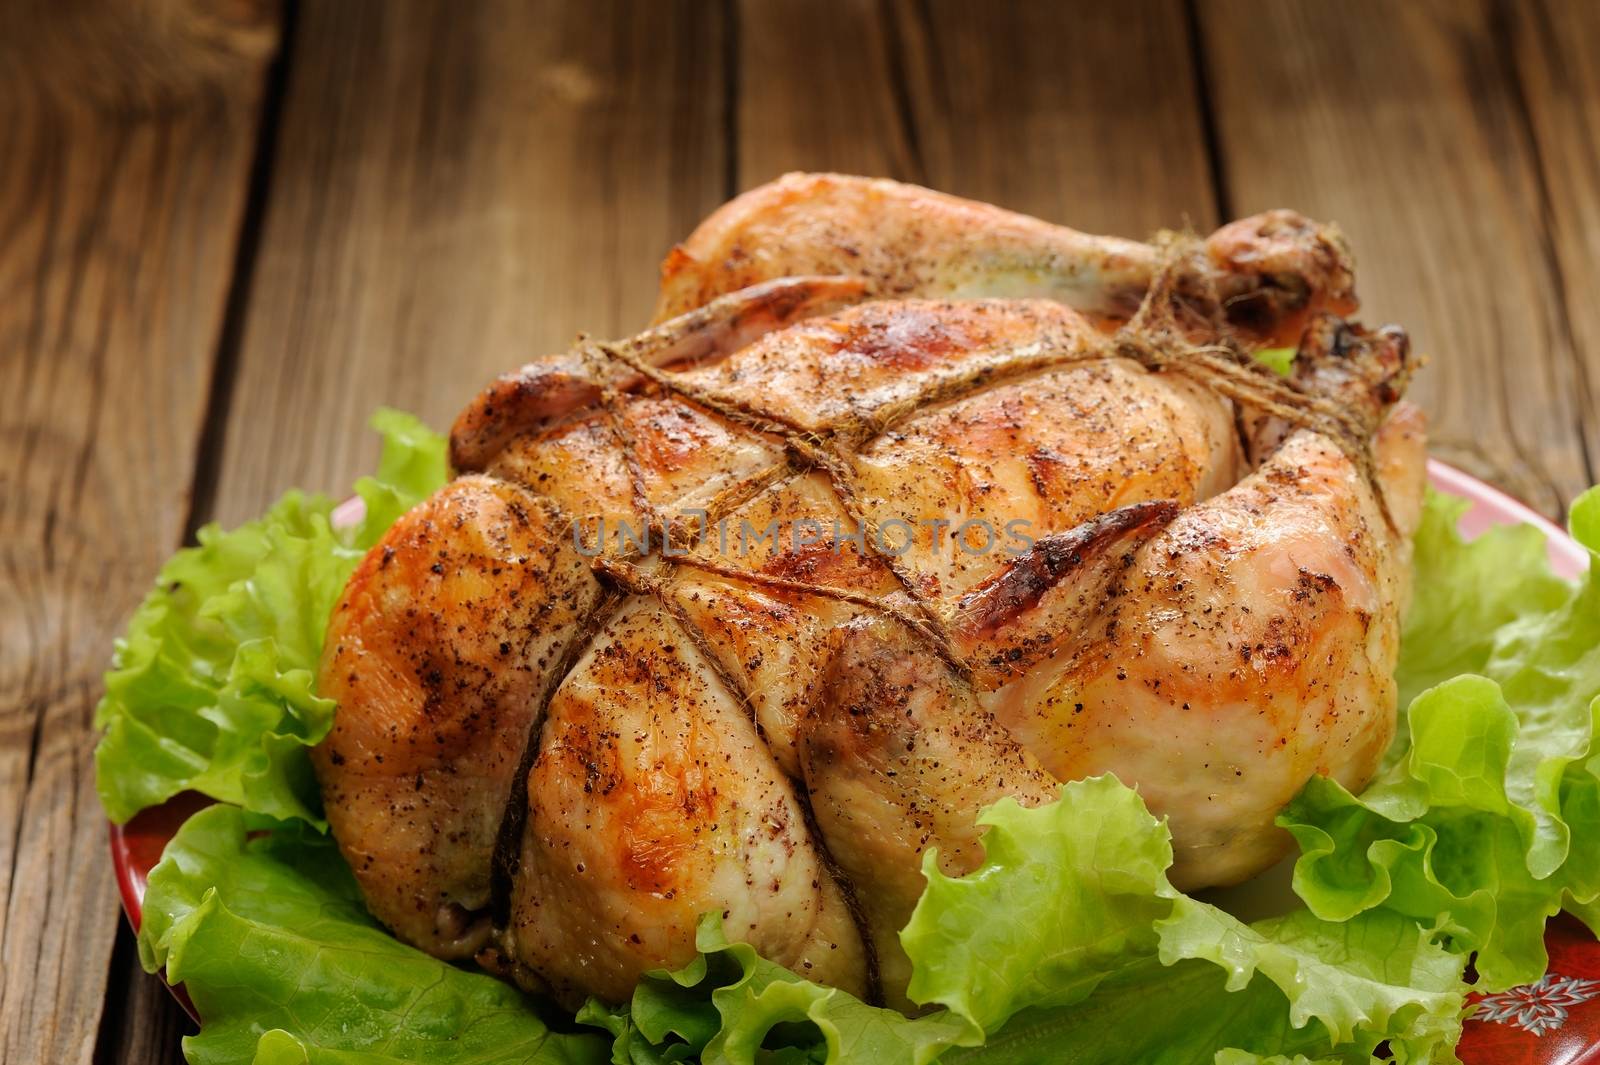 Bondage shibari roasted chicken with salad leaves on red plate on wooden background closeup horizontal